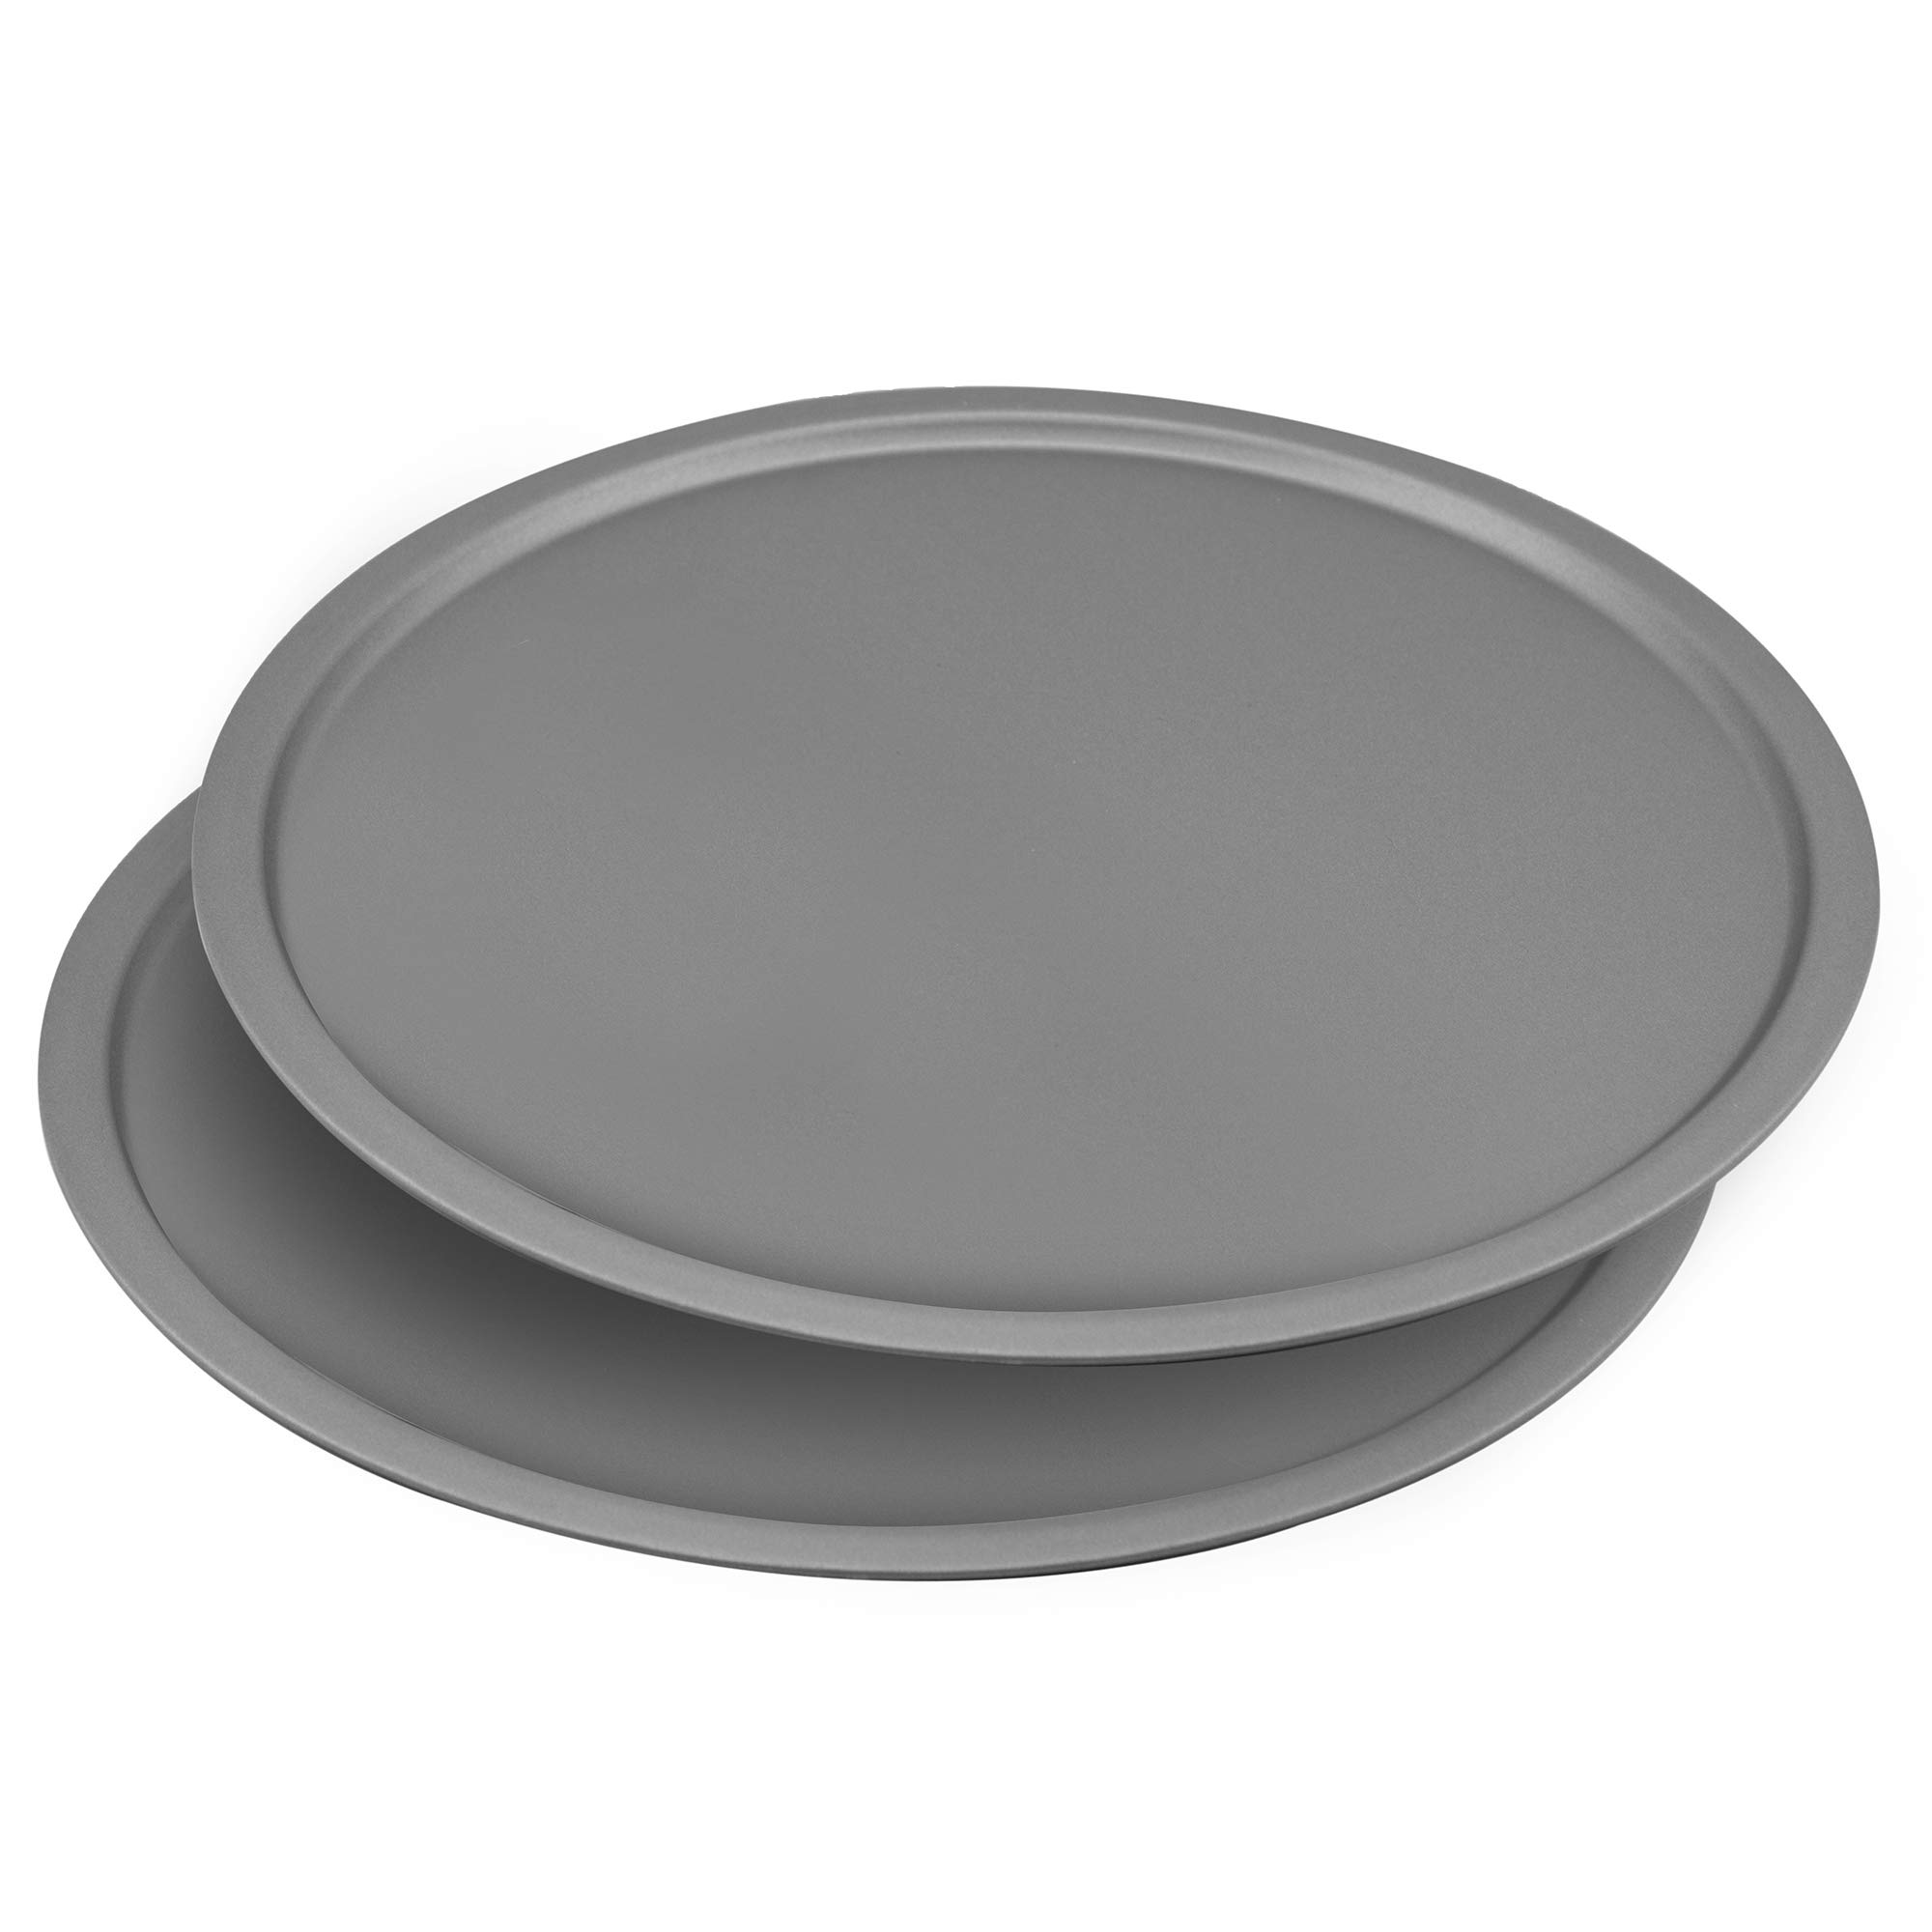 G & S Metal Products Company OvenStuff Nonstick 12” Pizza Pan, 2-Piece Set, Gray